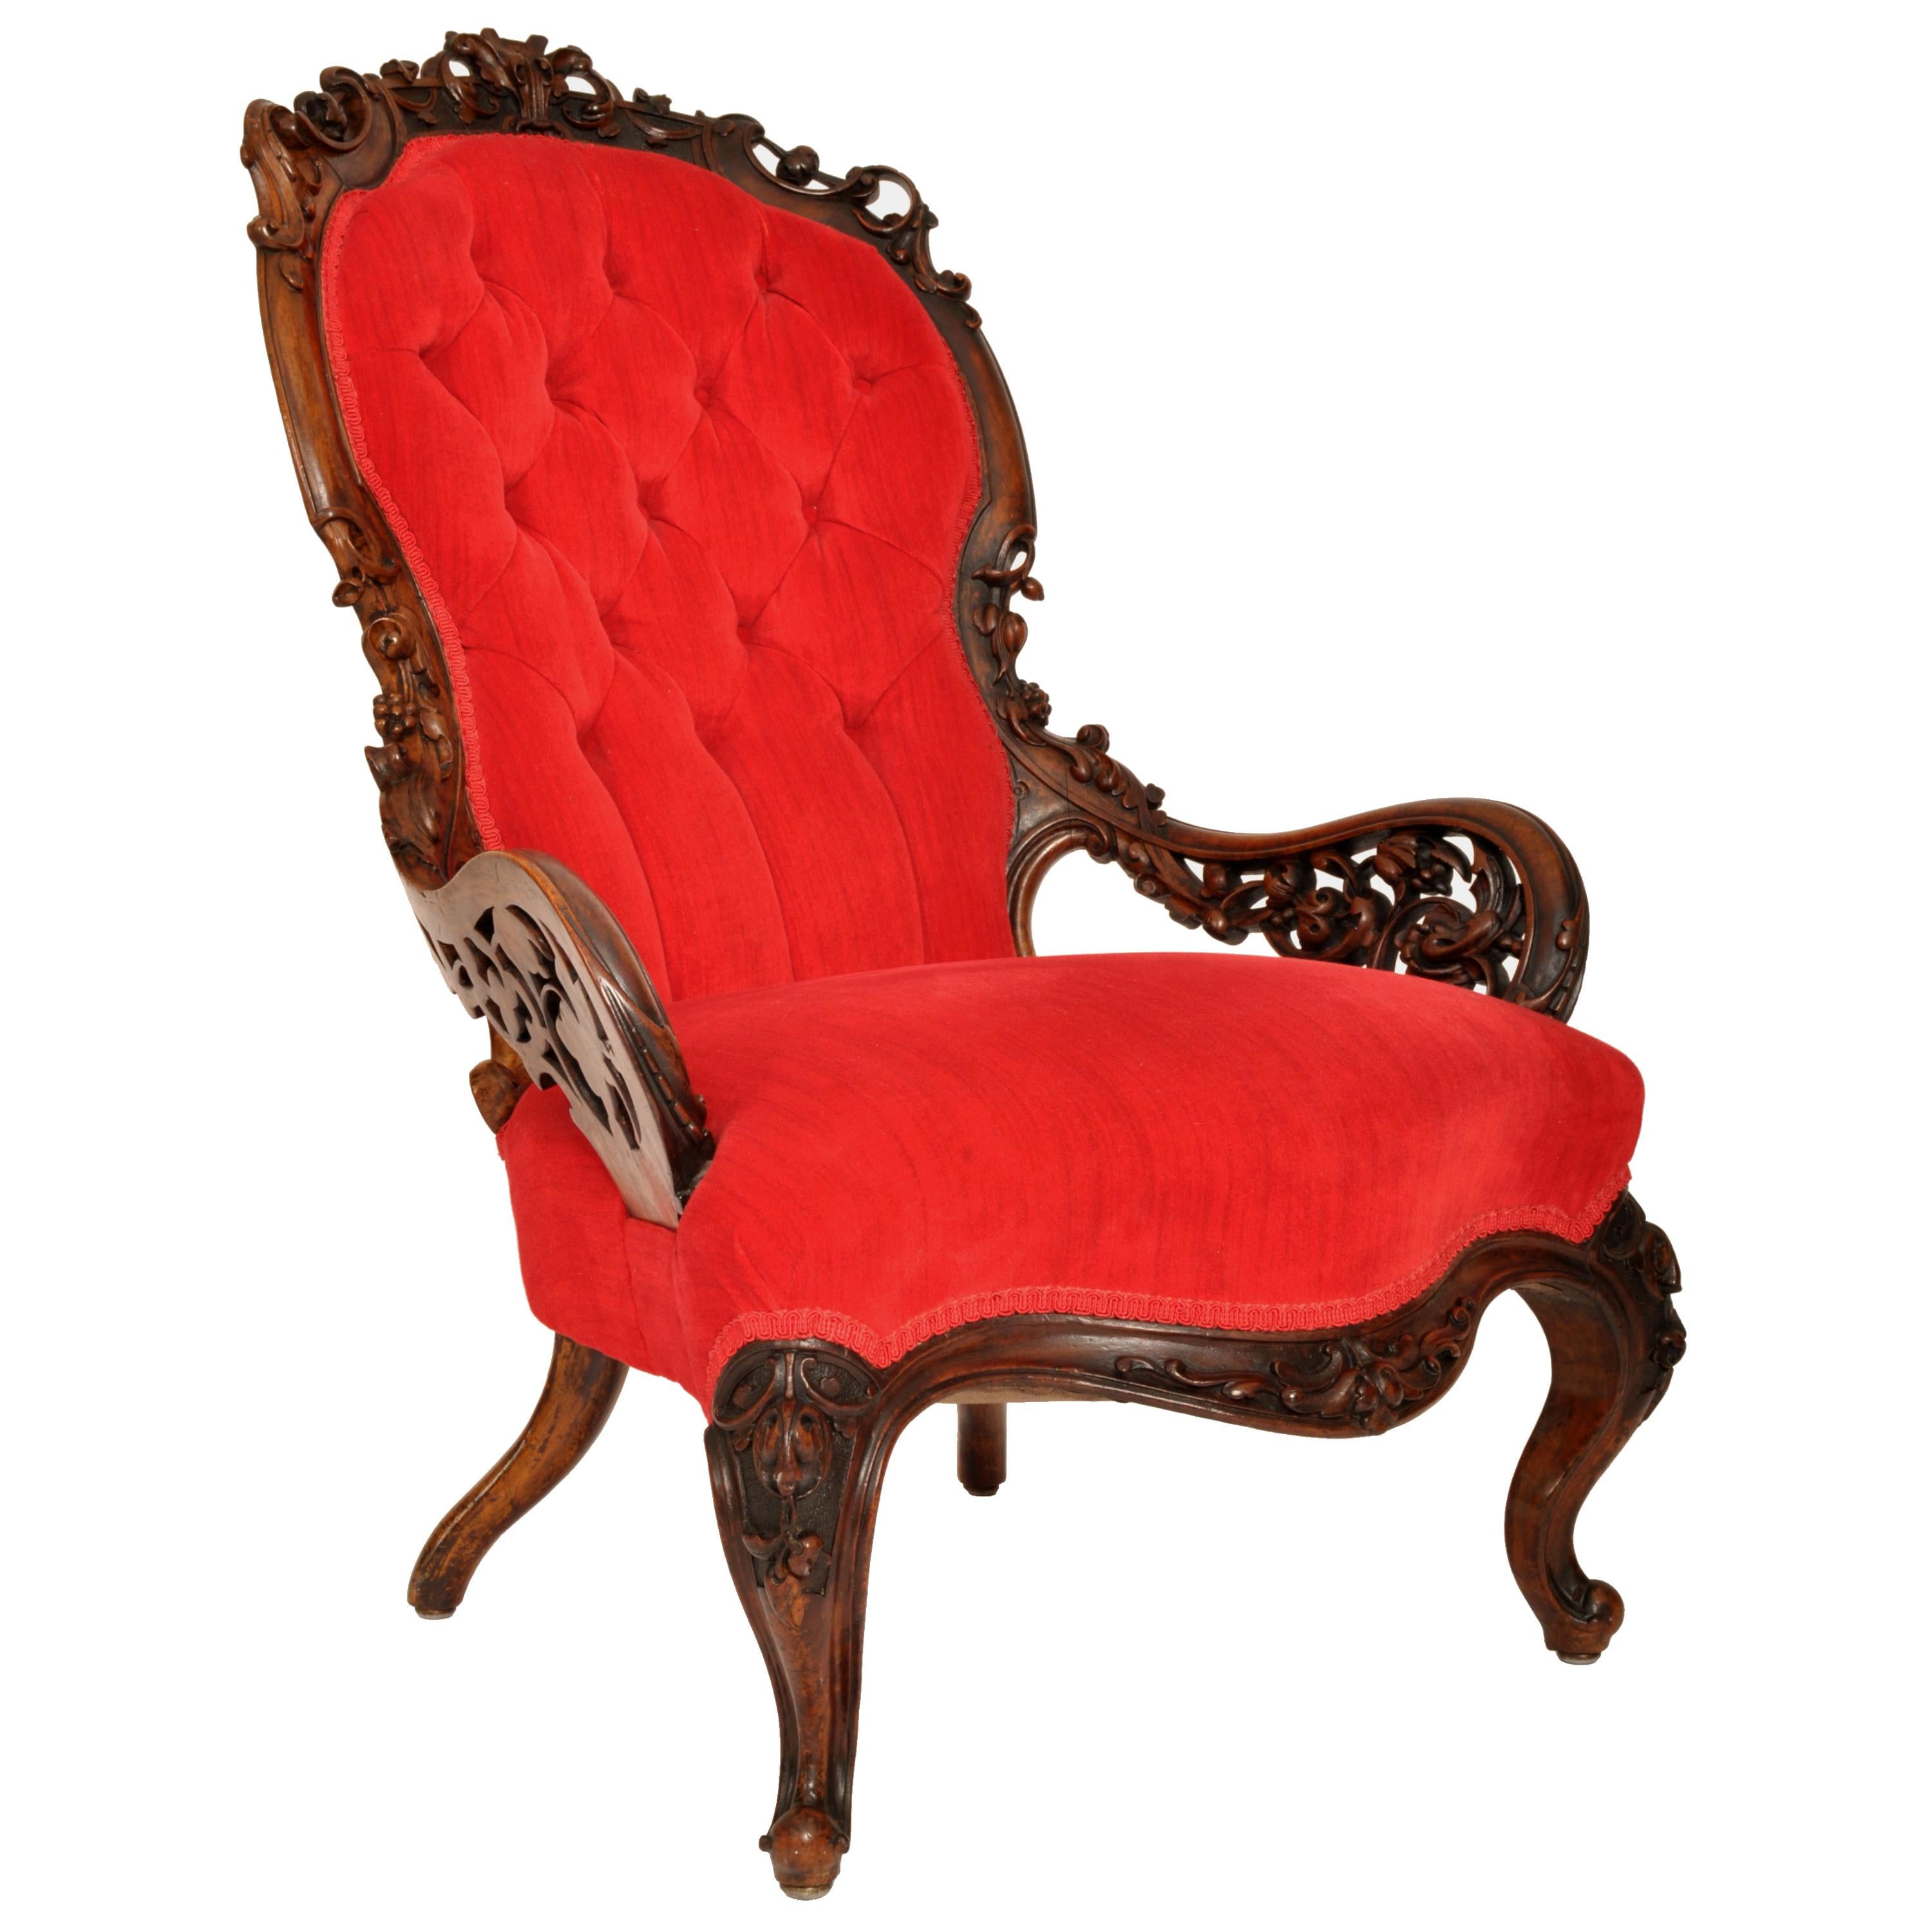 A good antique American mid 19th century carved Rococco rosewood armchair, by John Henry Belter or Joseph Meeks, New York, 1850's.
The chair having a carved & pierced scrolling top, with a deep buttoned/tufted back rest, the chair having